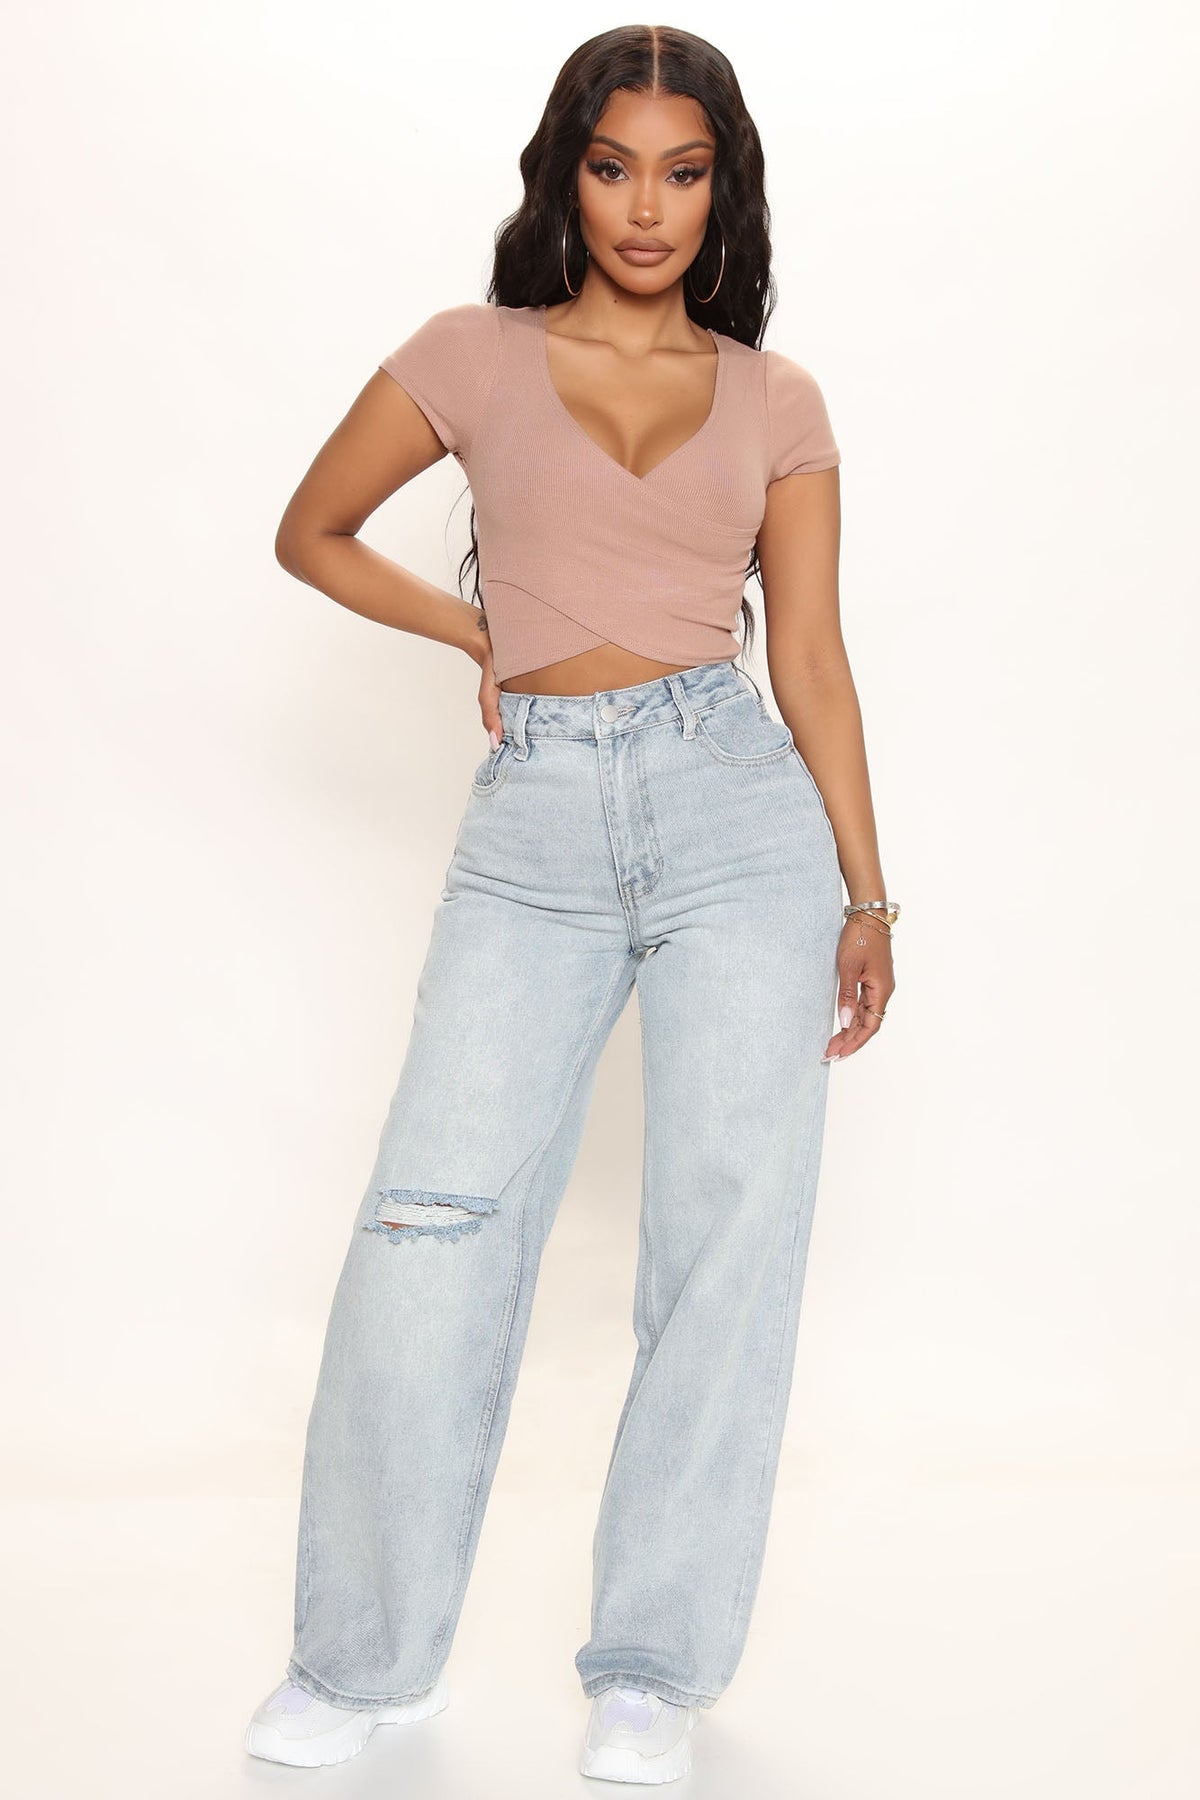 Loose And Easy High Waist Ripped Straight Leg Jeans - Light Blue Wash